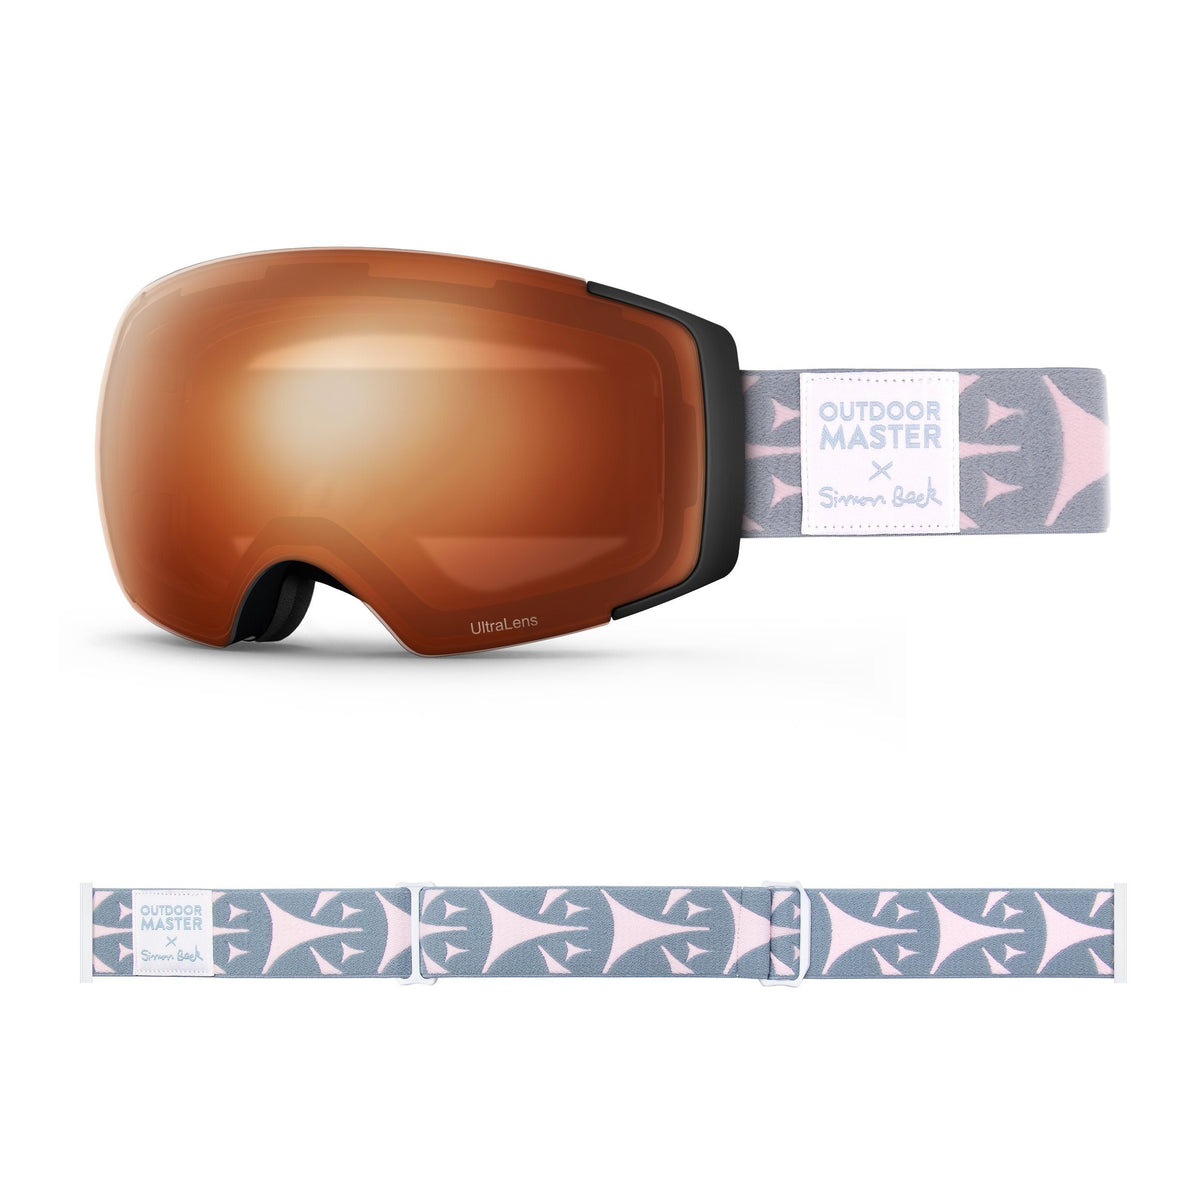 OutdoorMaster x Simon Beck Ski Goggles Pro Series - Snowshoeing Art Limited Edition OutdoorMaster UltraLens VLT 29% Optimized Orange Bouncy Triangles